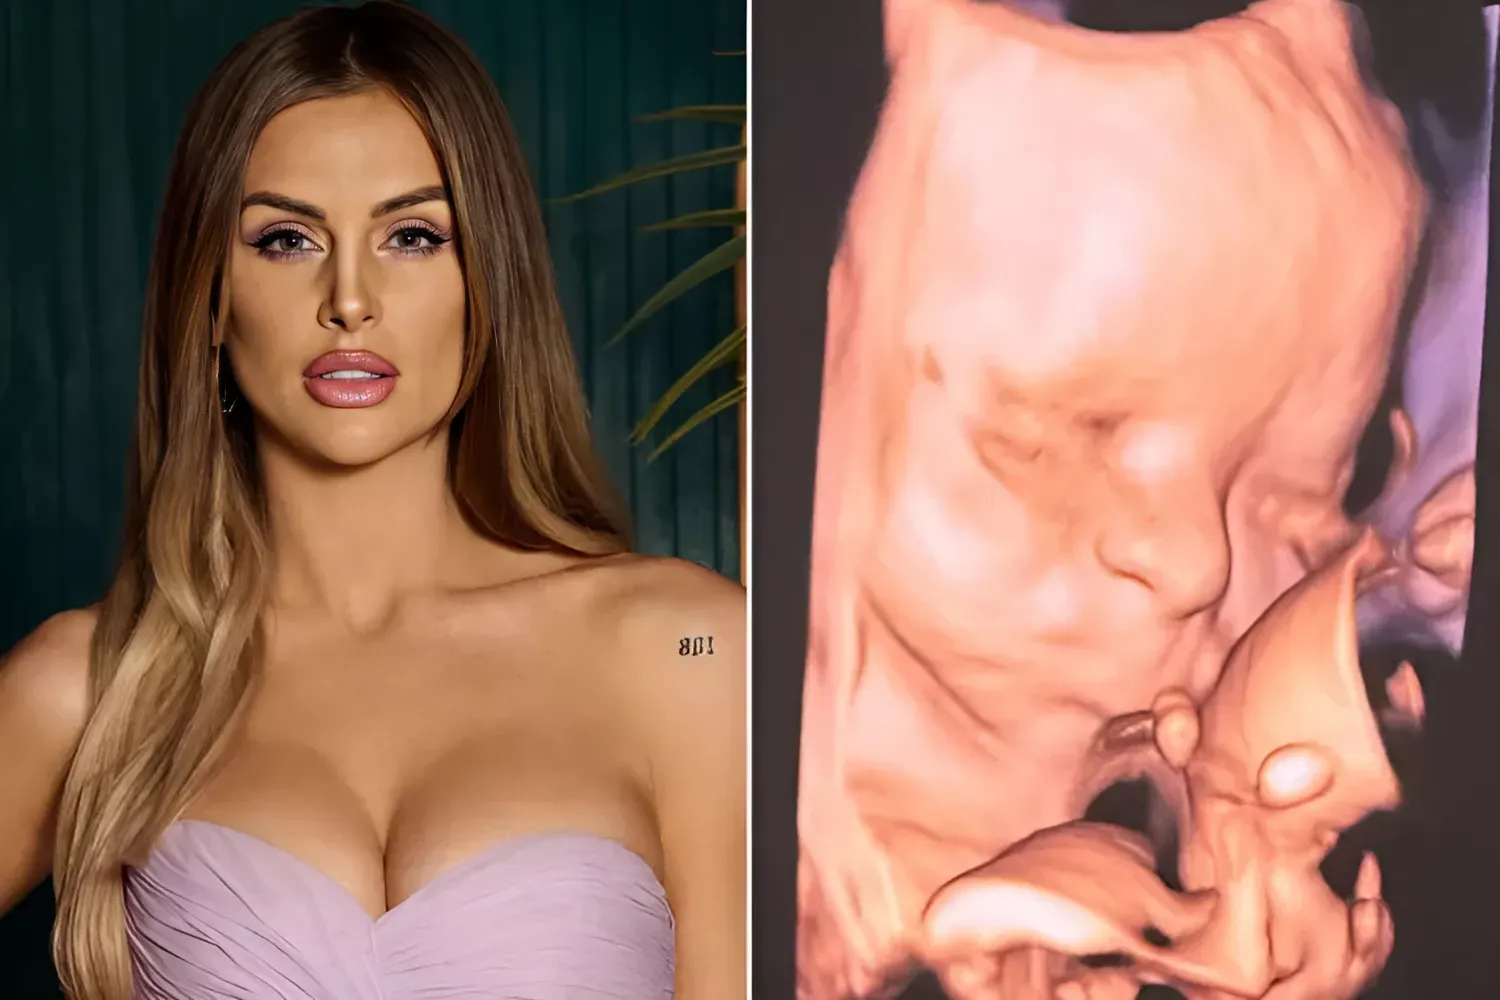 Pregnant Lala Kent Shares Ultrasound Image of Her Baby Girl: 'We Can't Wait to Welcome You'